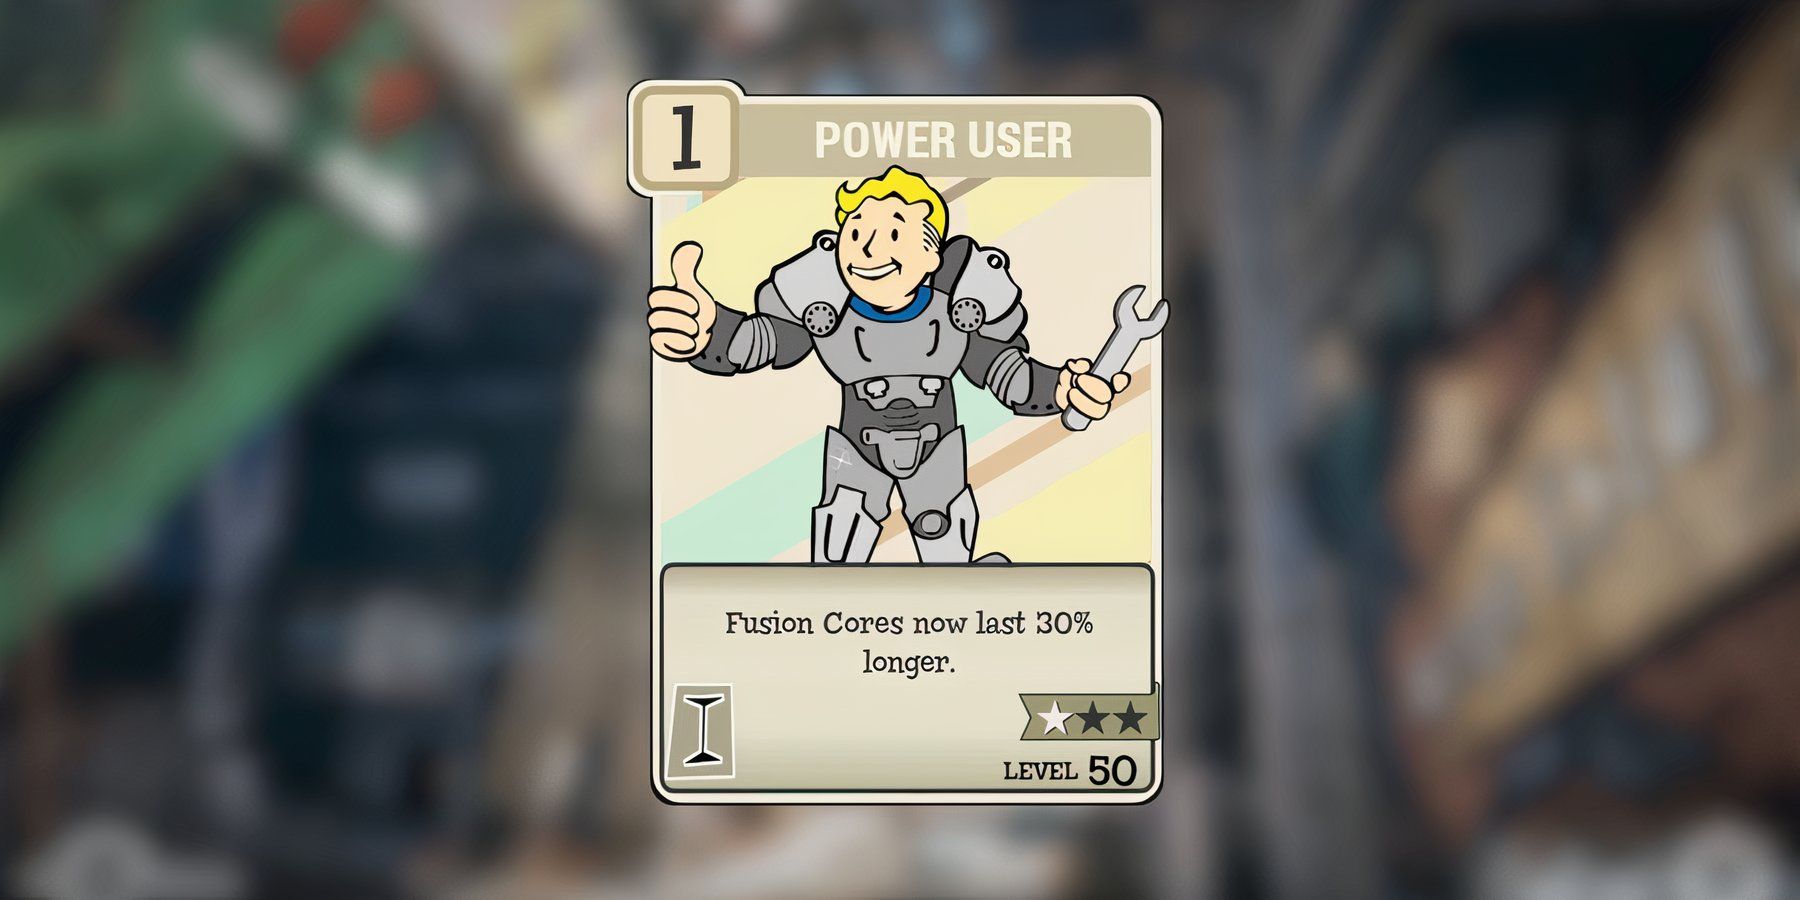 the power user perk card in fallout 76.